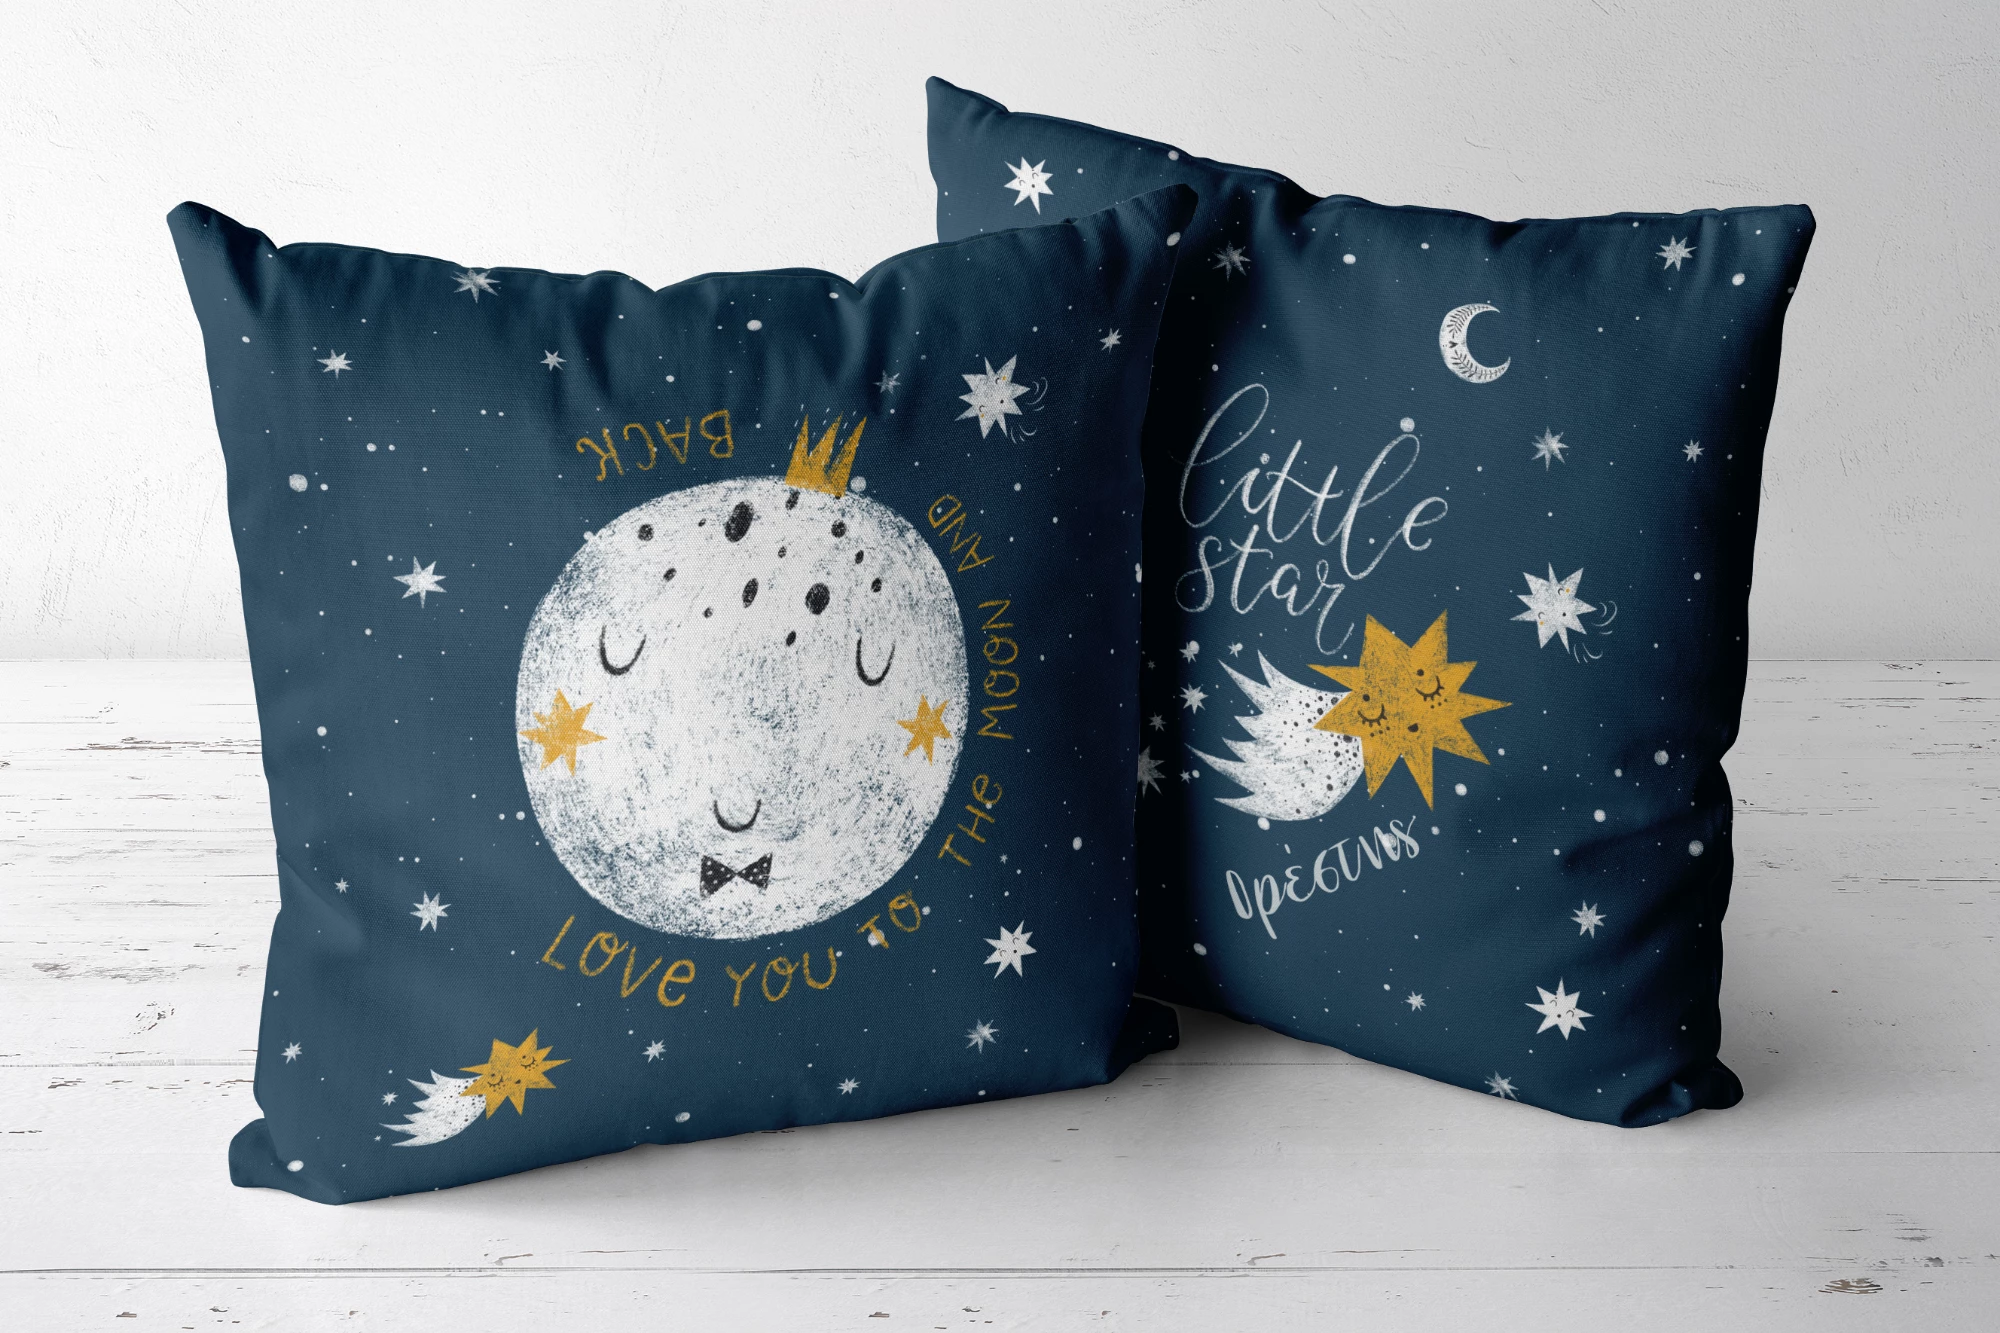 Love you to the moon and back Little star premium quality personalized pillow cover